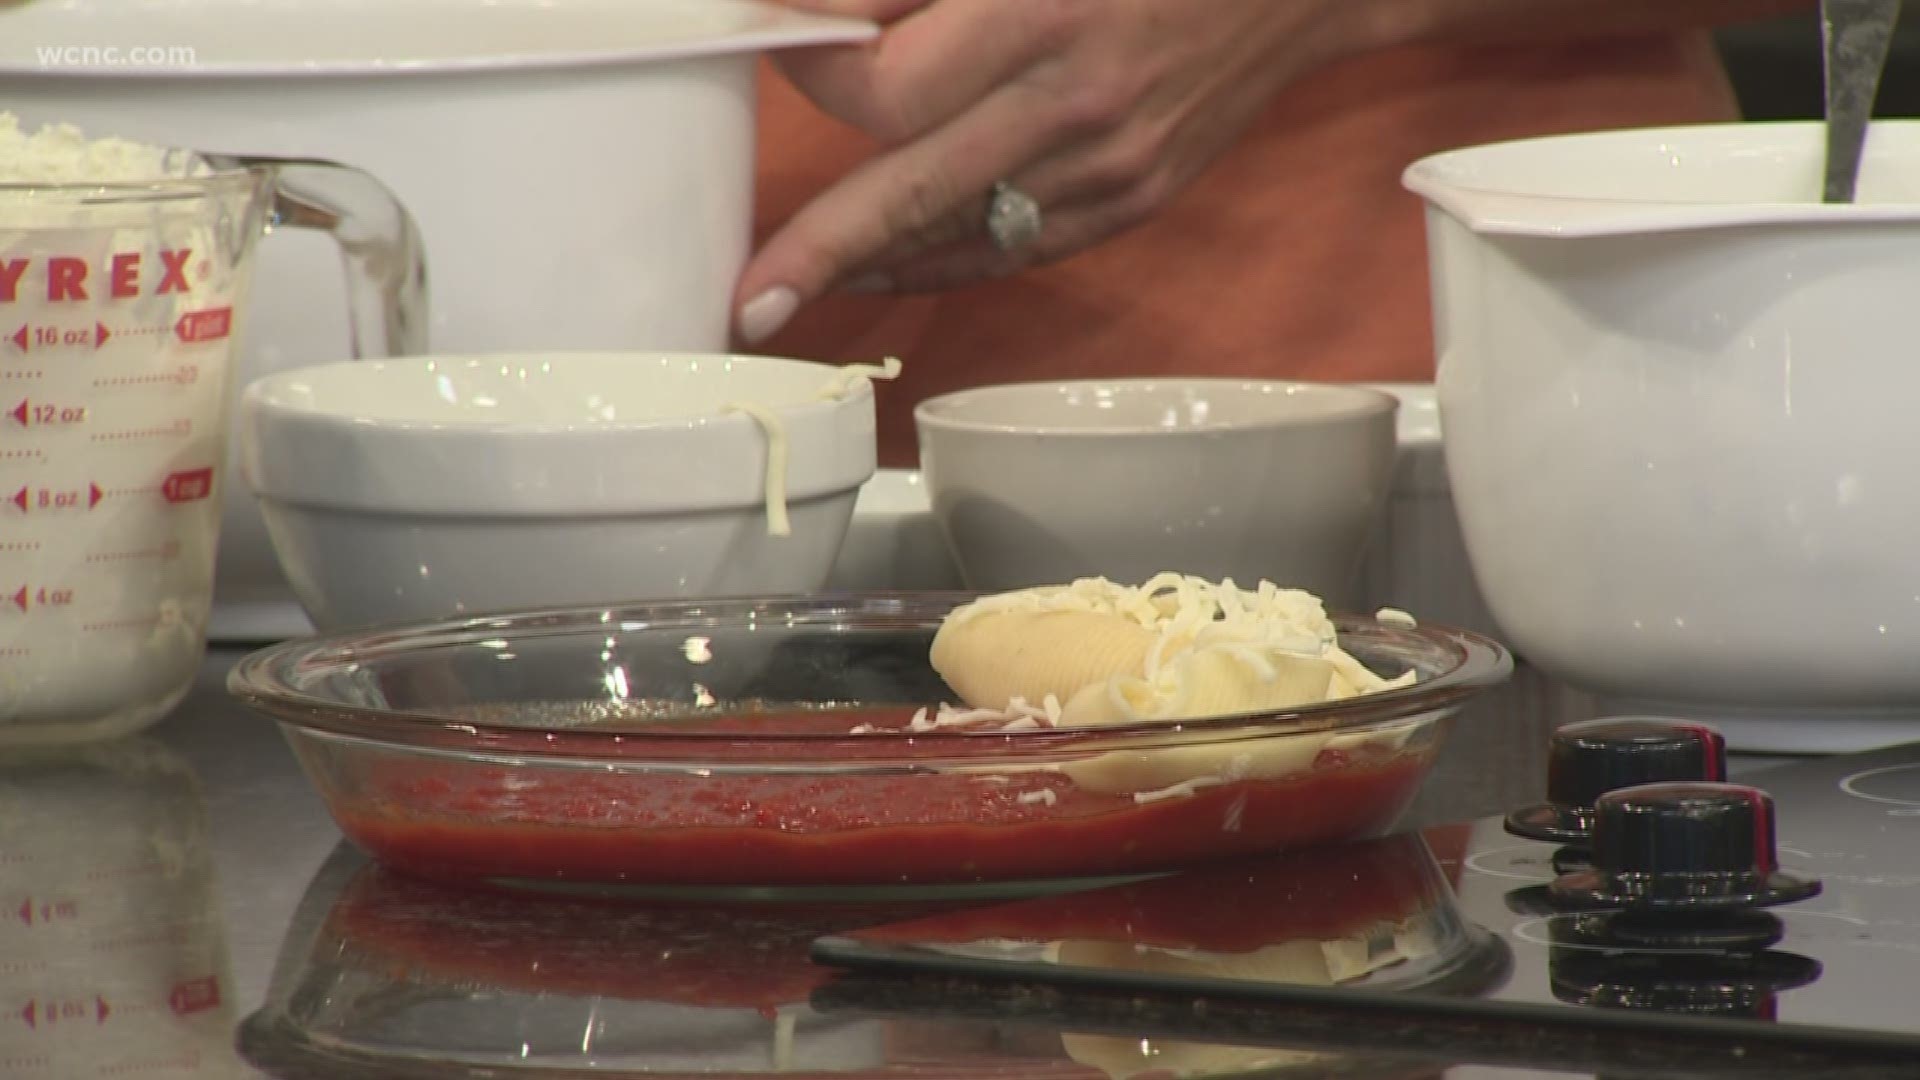 DeSarno?s shows us how to make this delicious meal